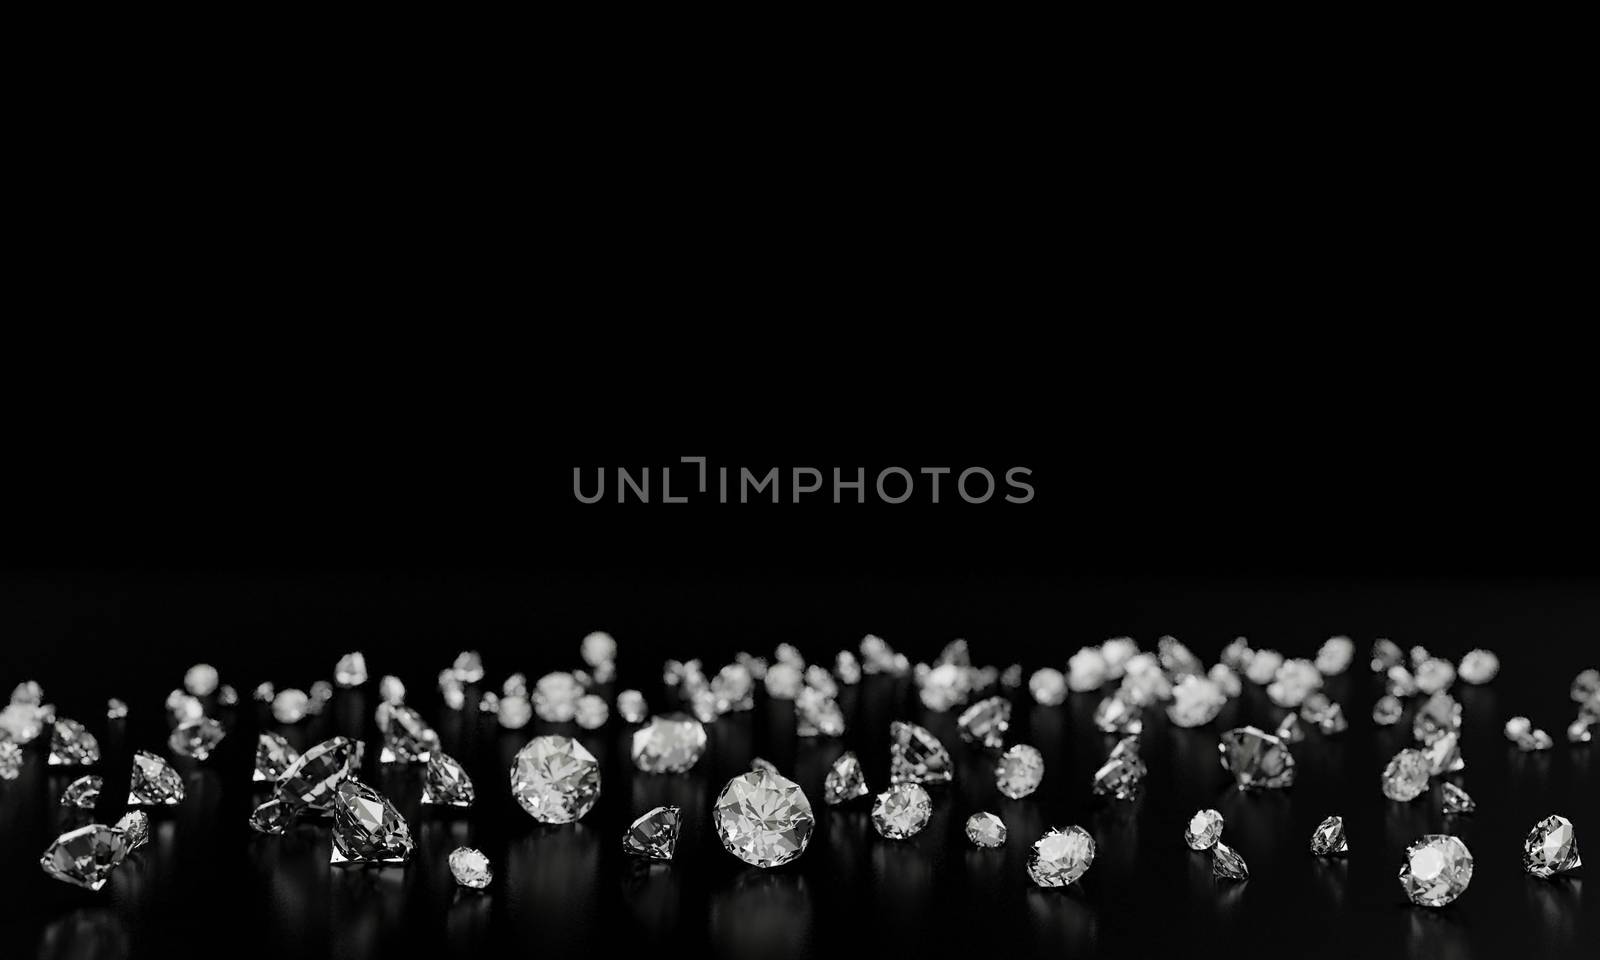 Diamonds on black background with reflect on surface. by ridersuperone